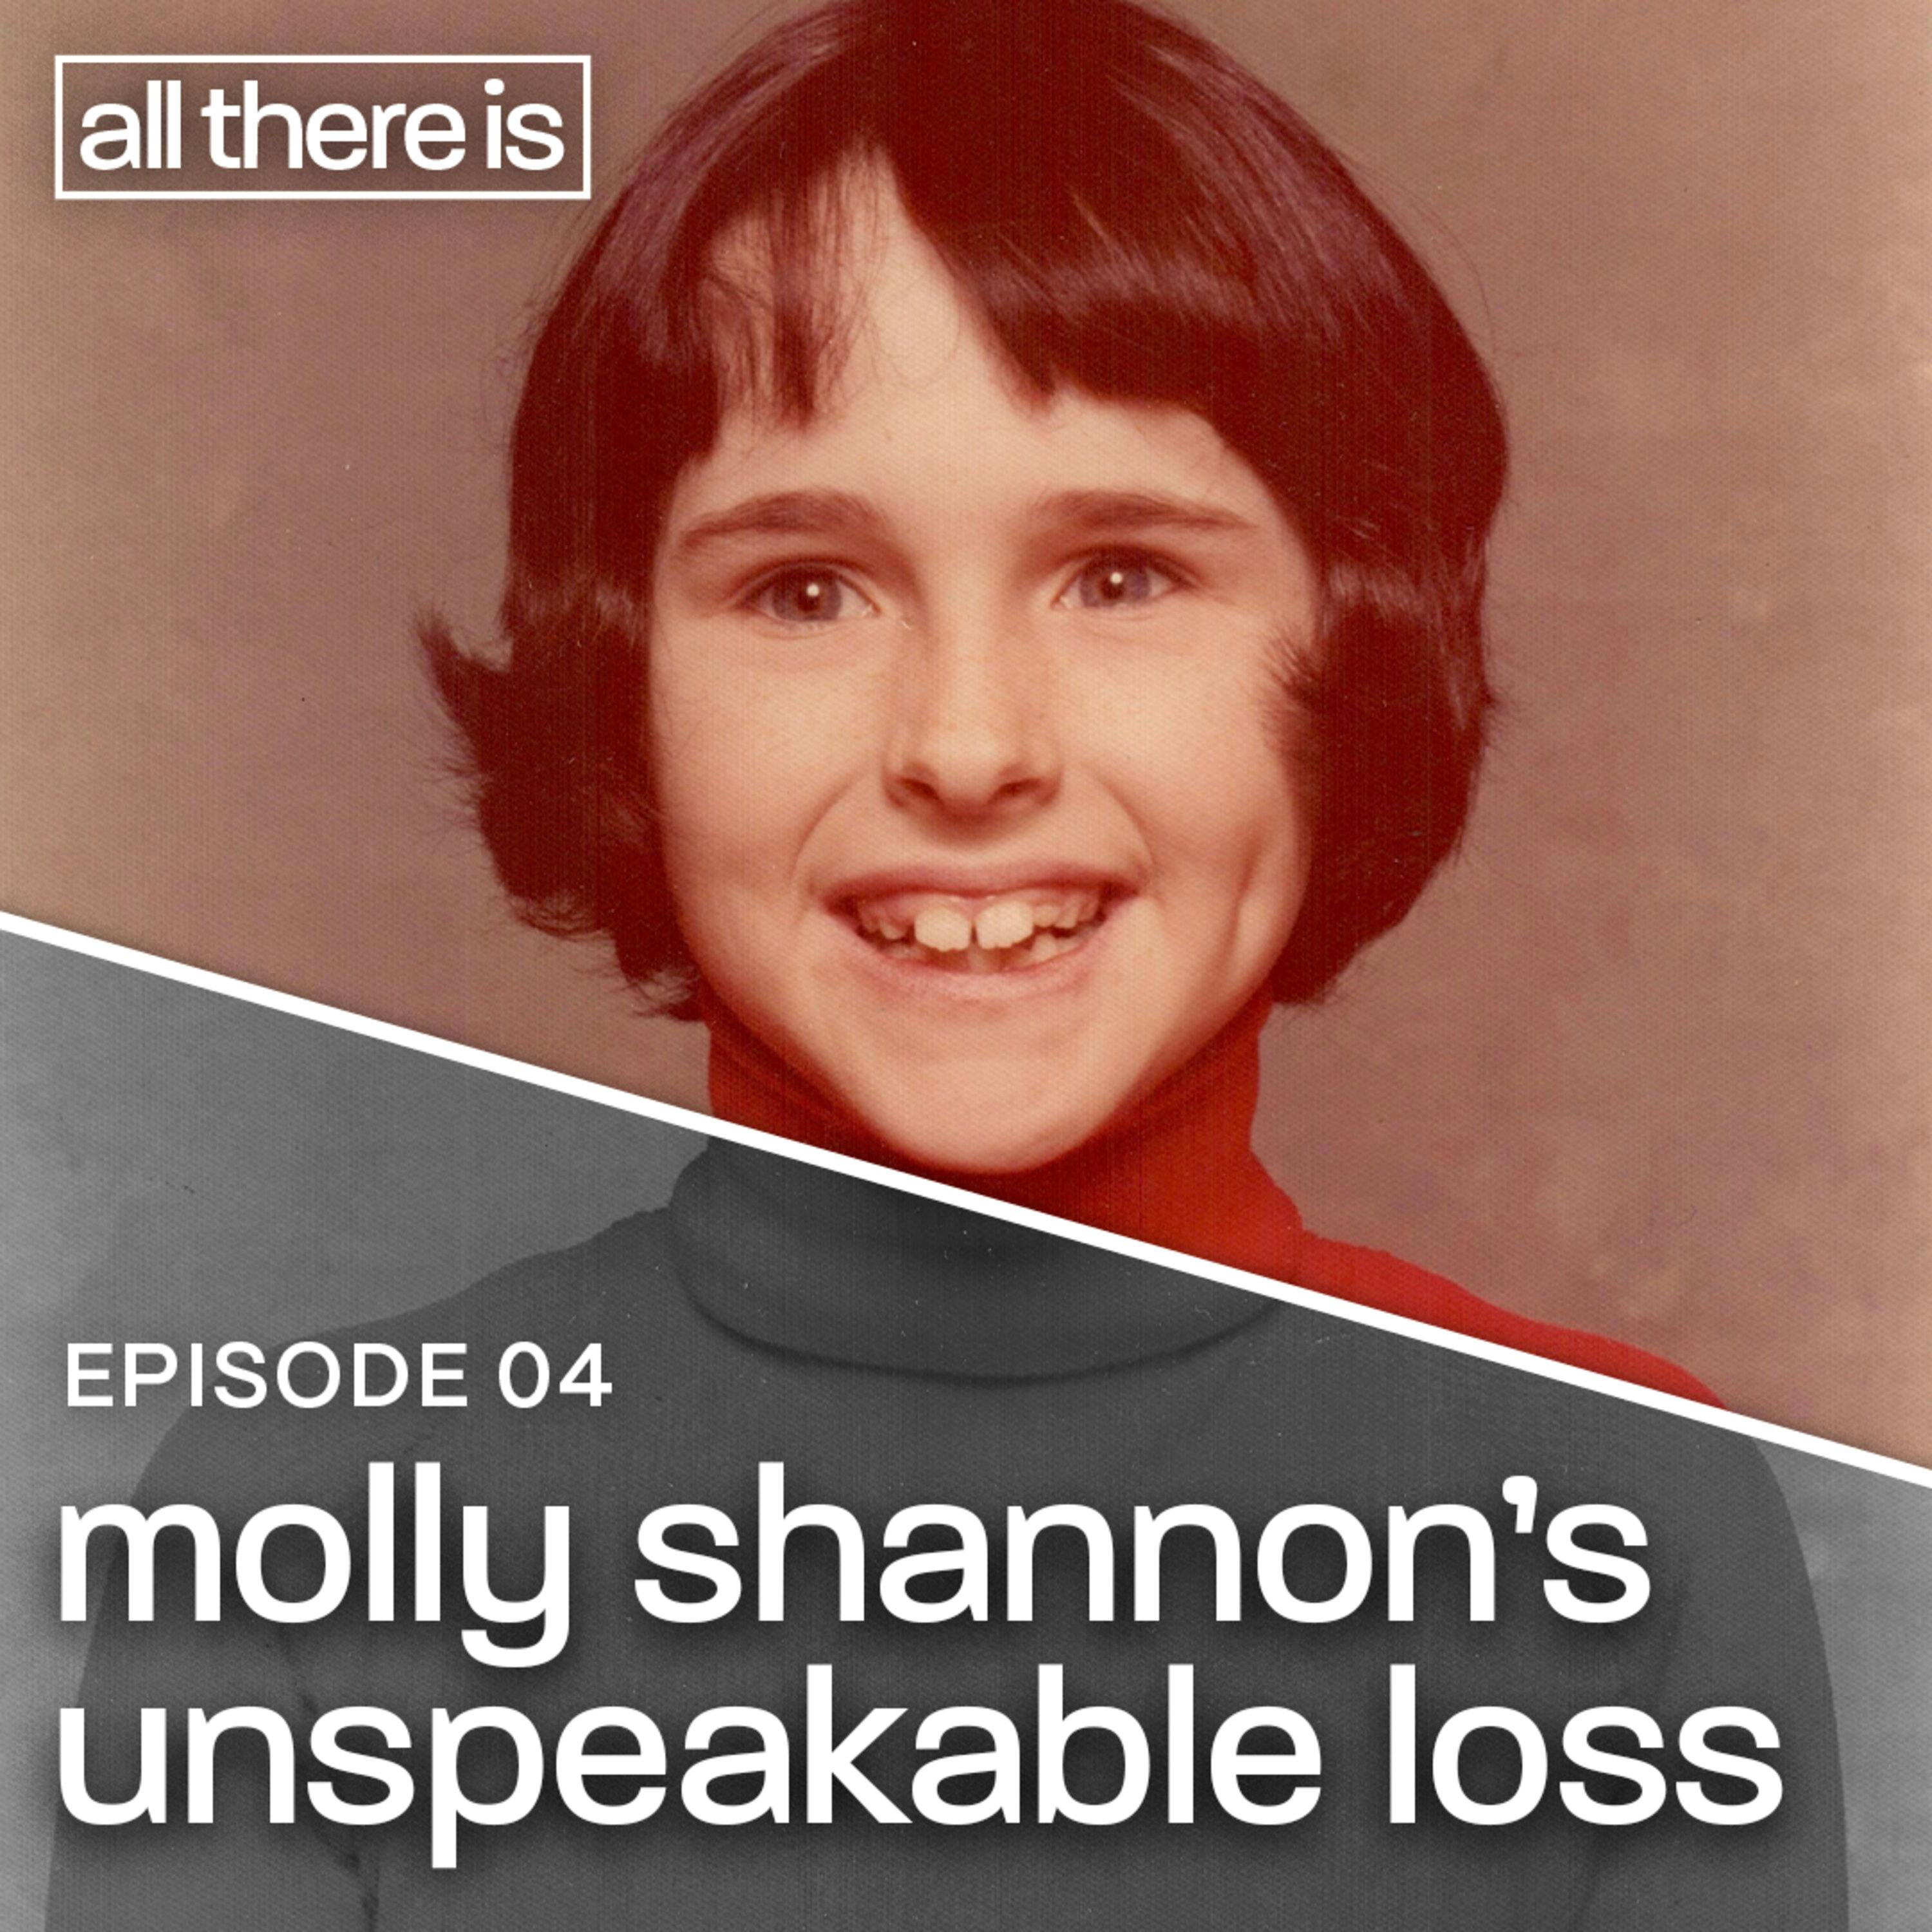 Molly Shannon’s Unspeakable Loss